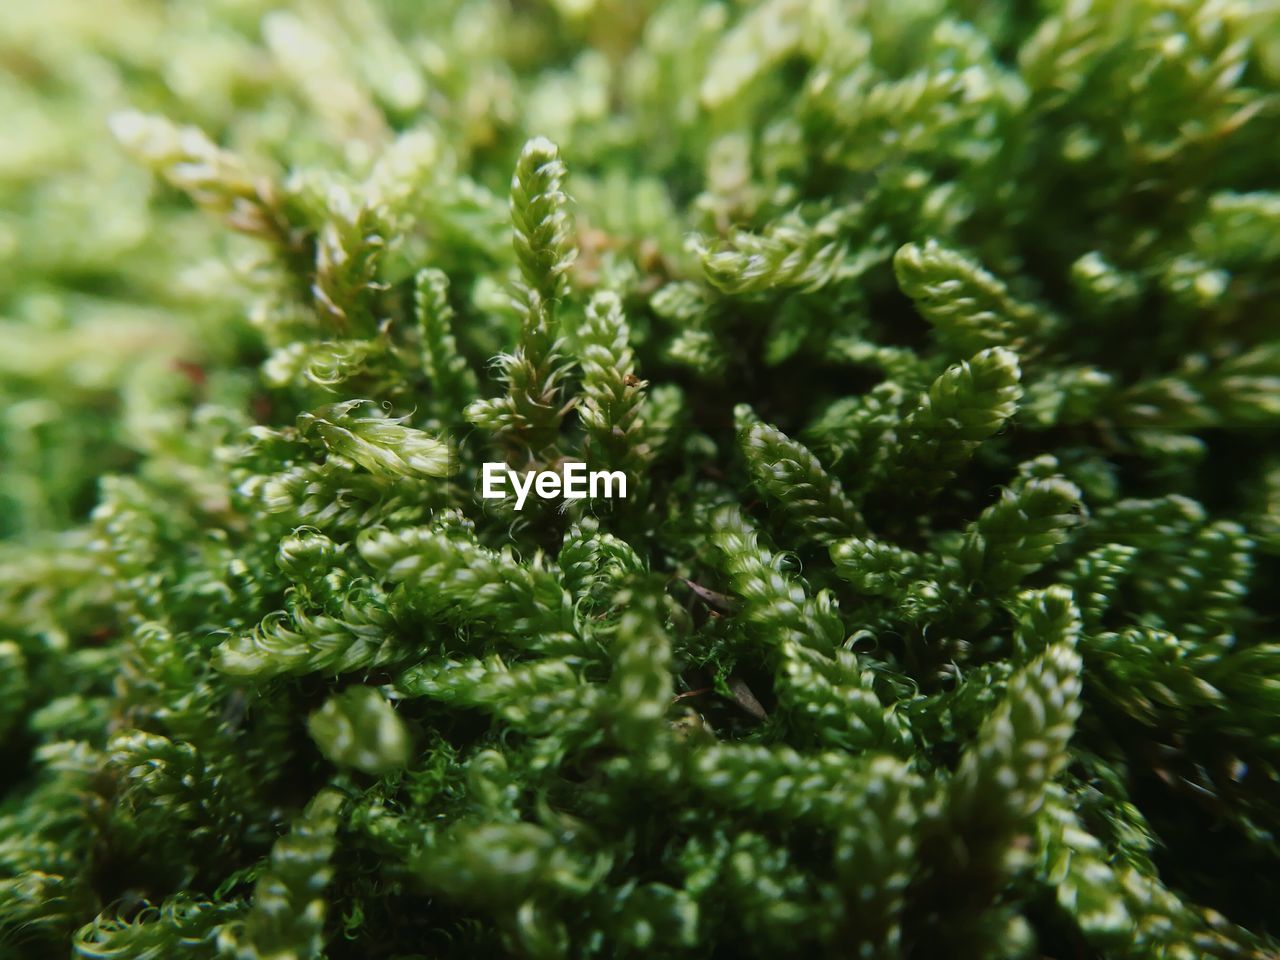 Extreme close up of plant